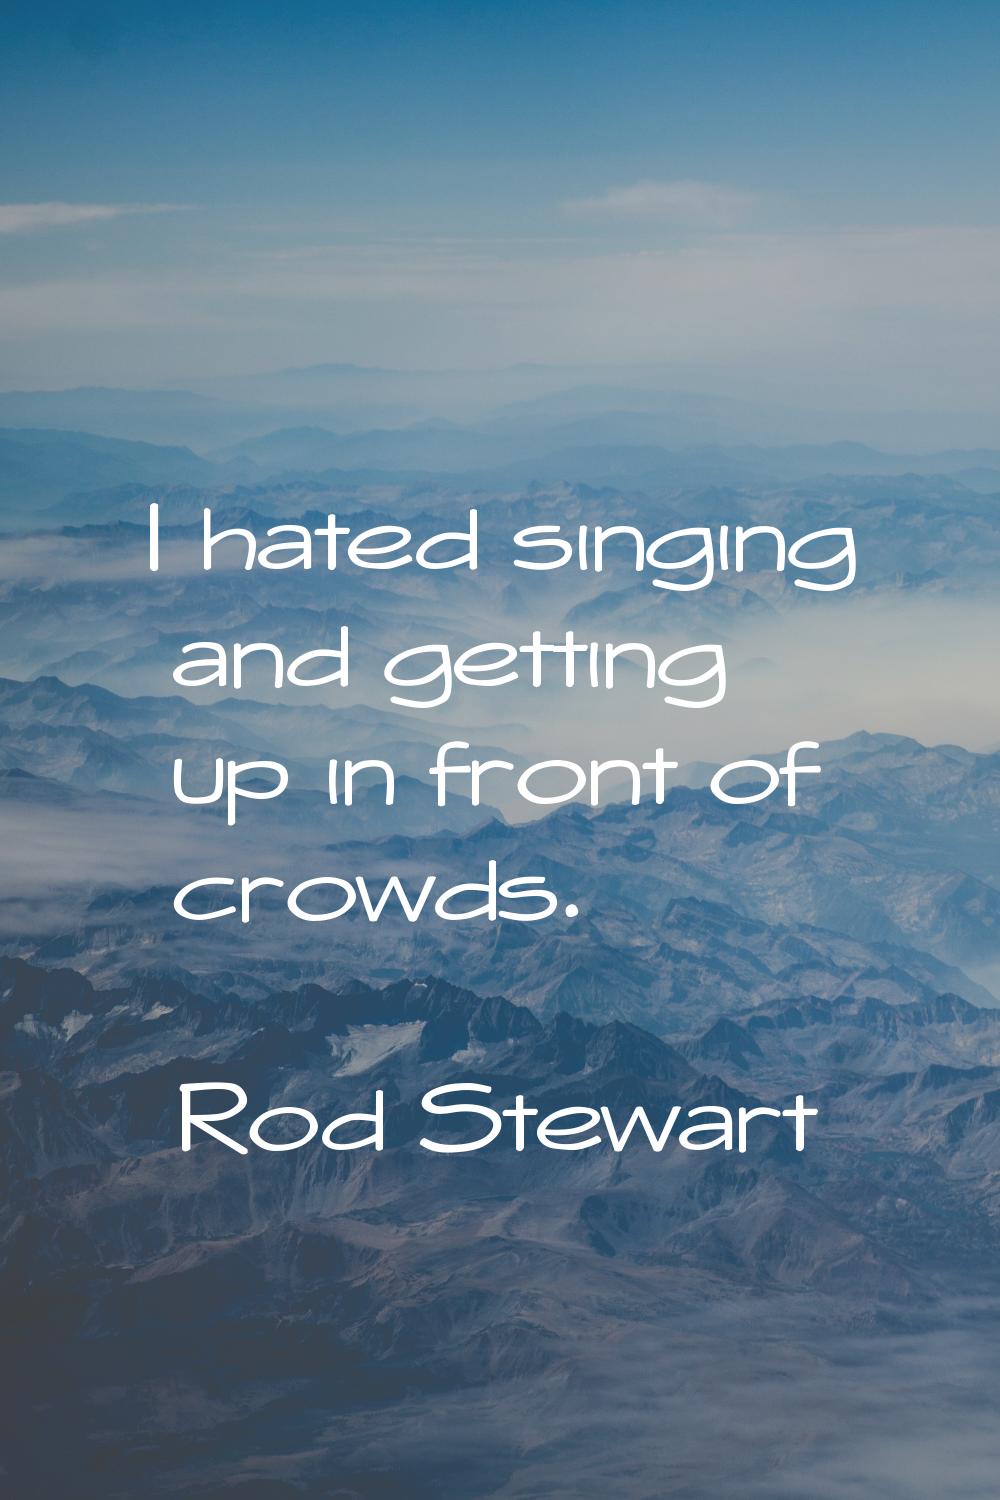 I hated singing and getting up in front of crowds.